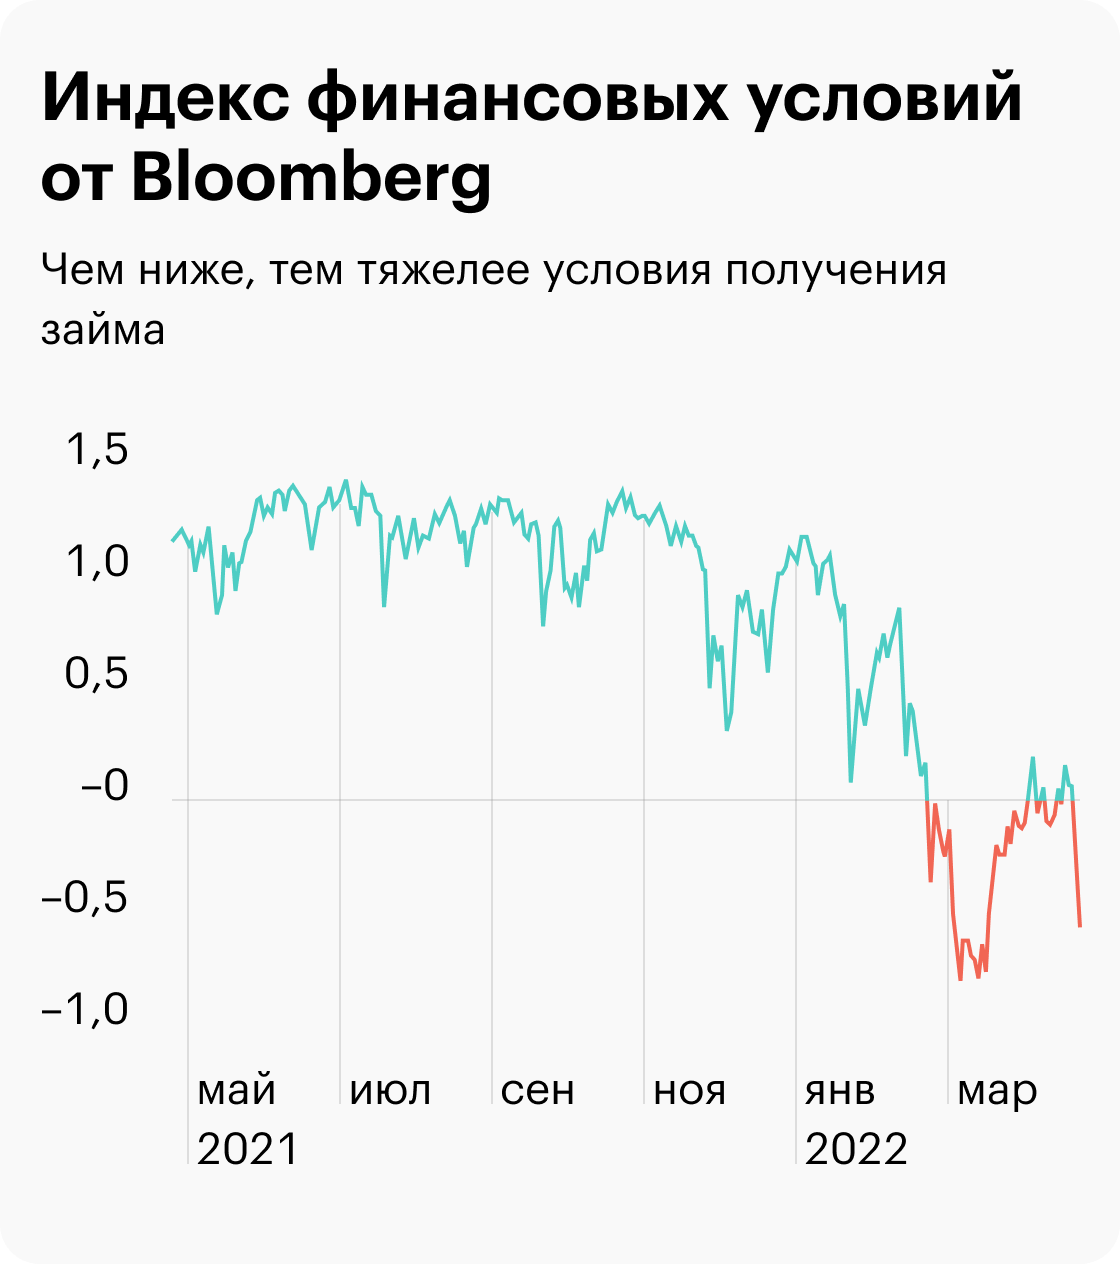 Источник: Daily Shot, Tighter financial conditions